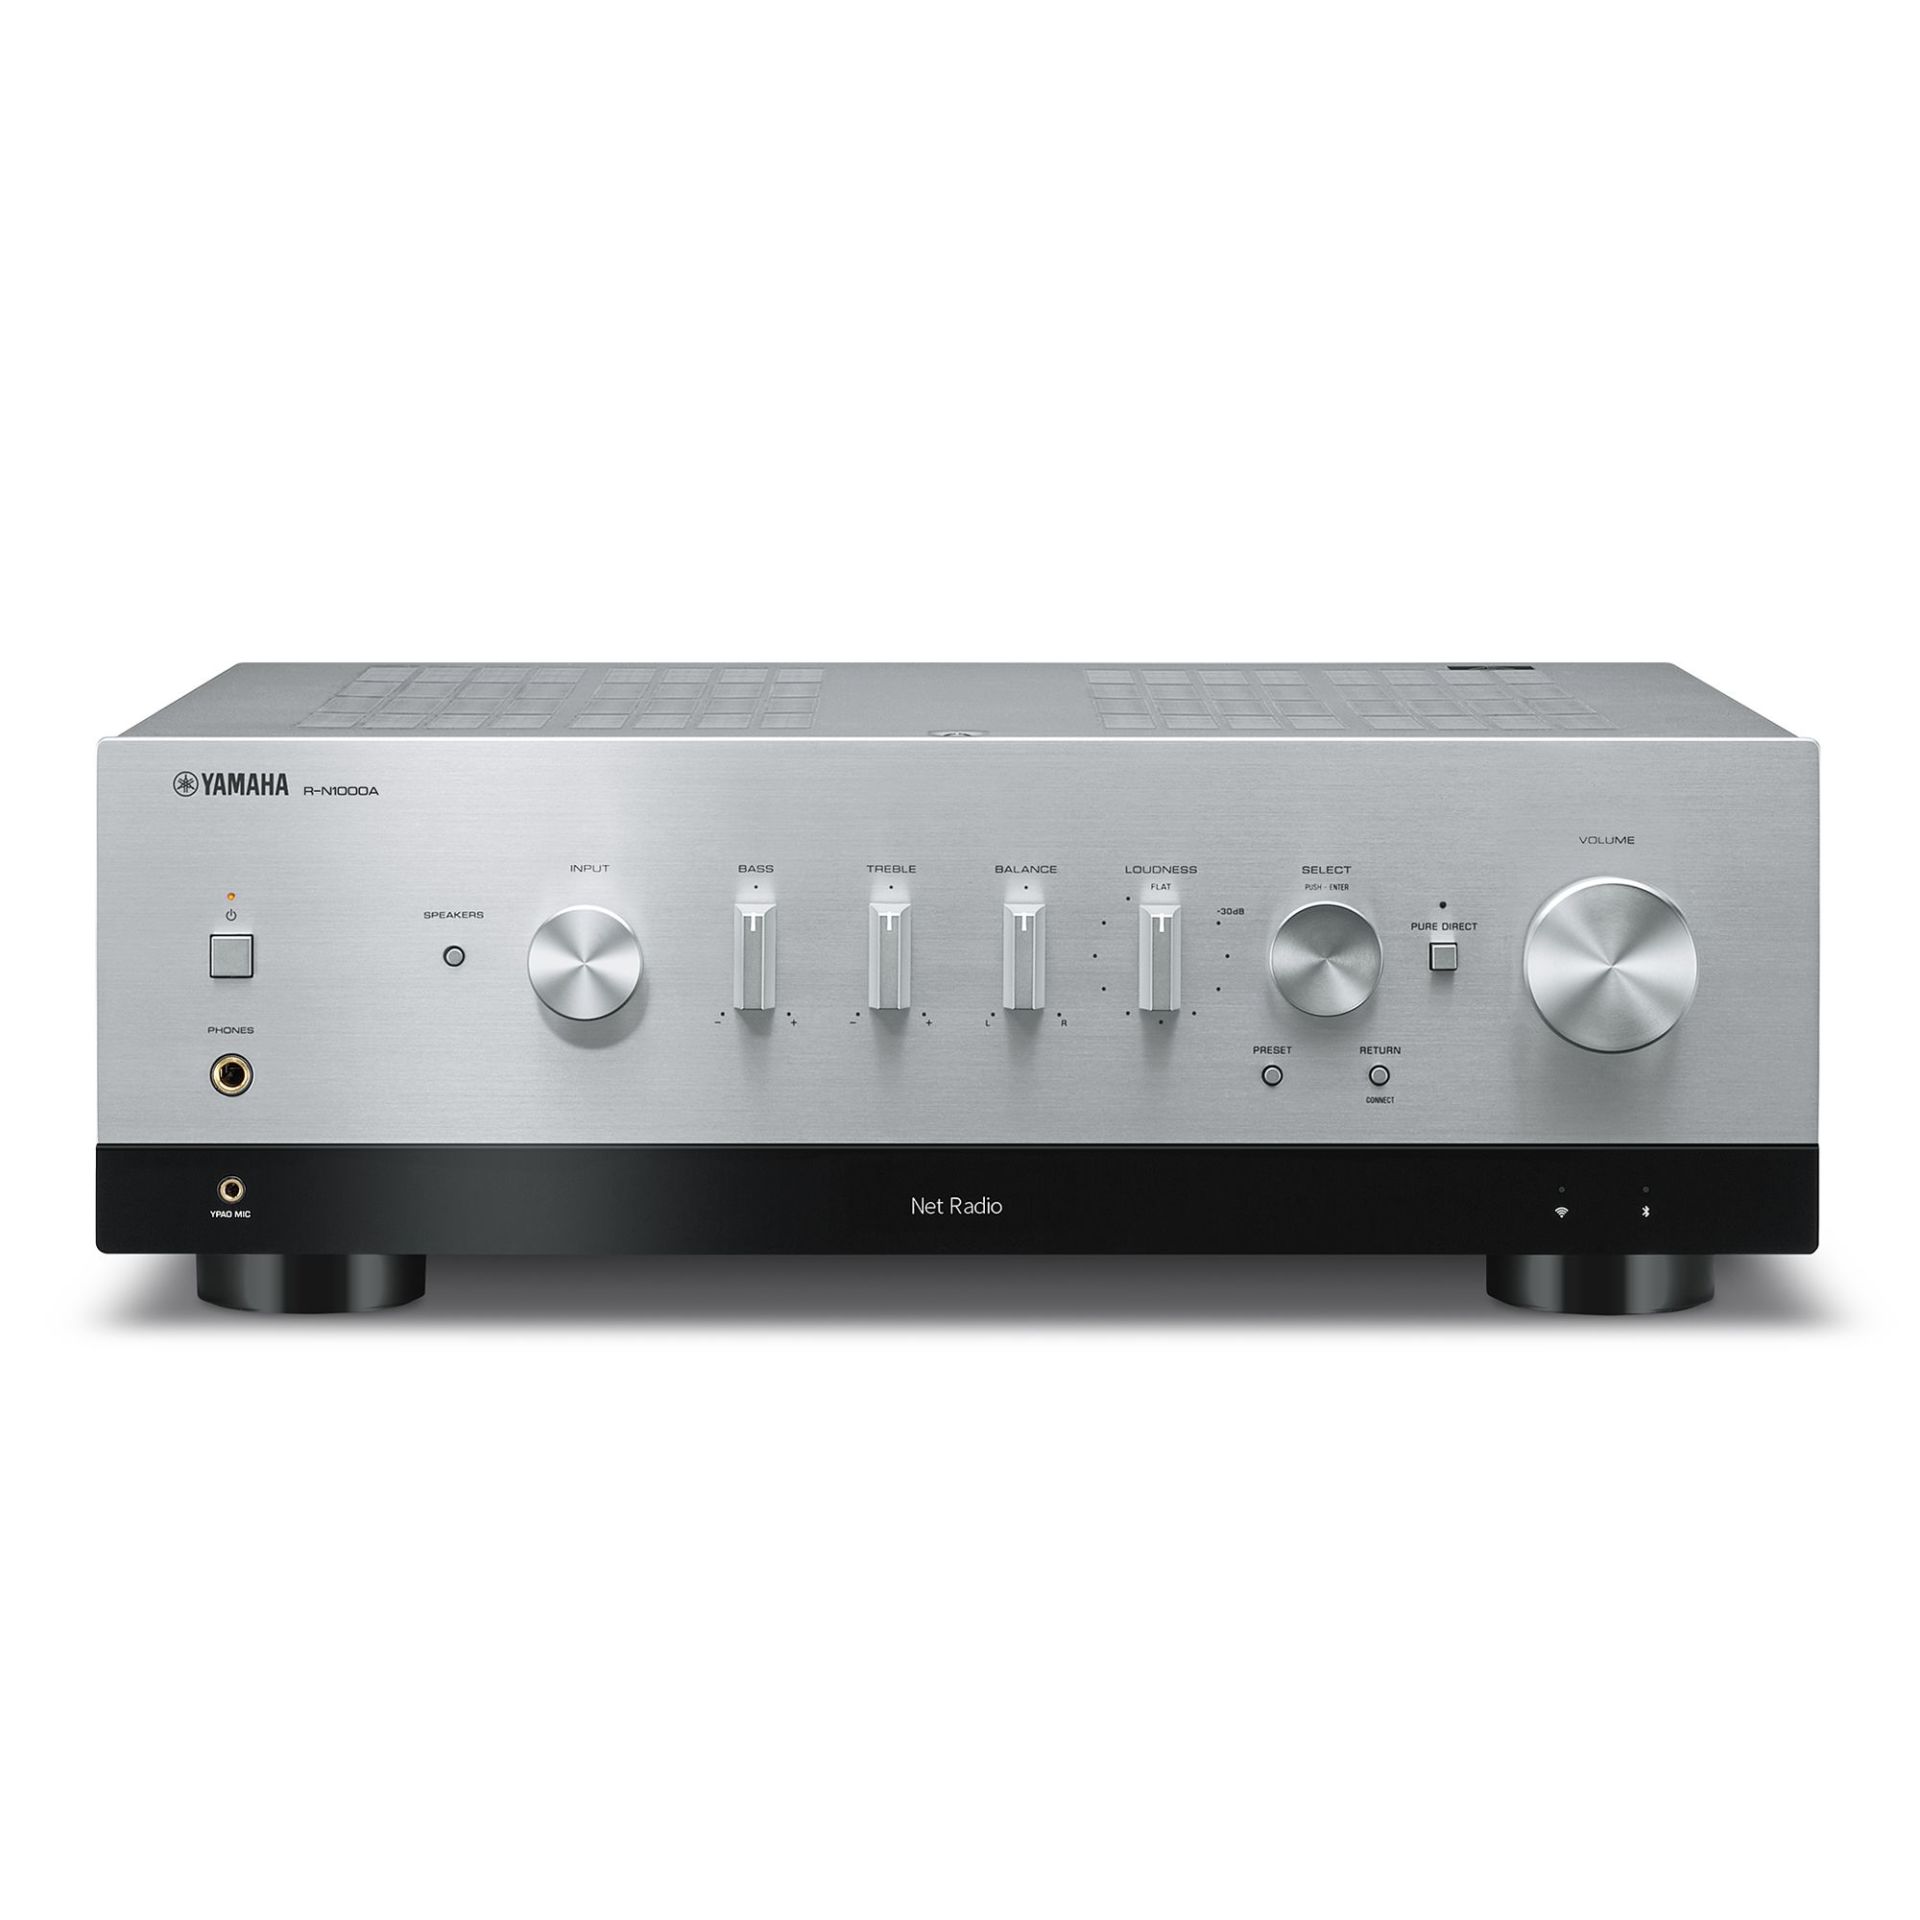 YAMAHA R-N1000A Stereo Network Receiver Amplifier